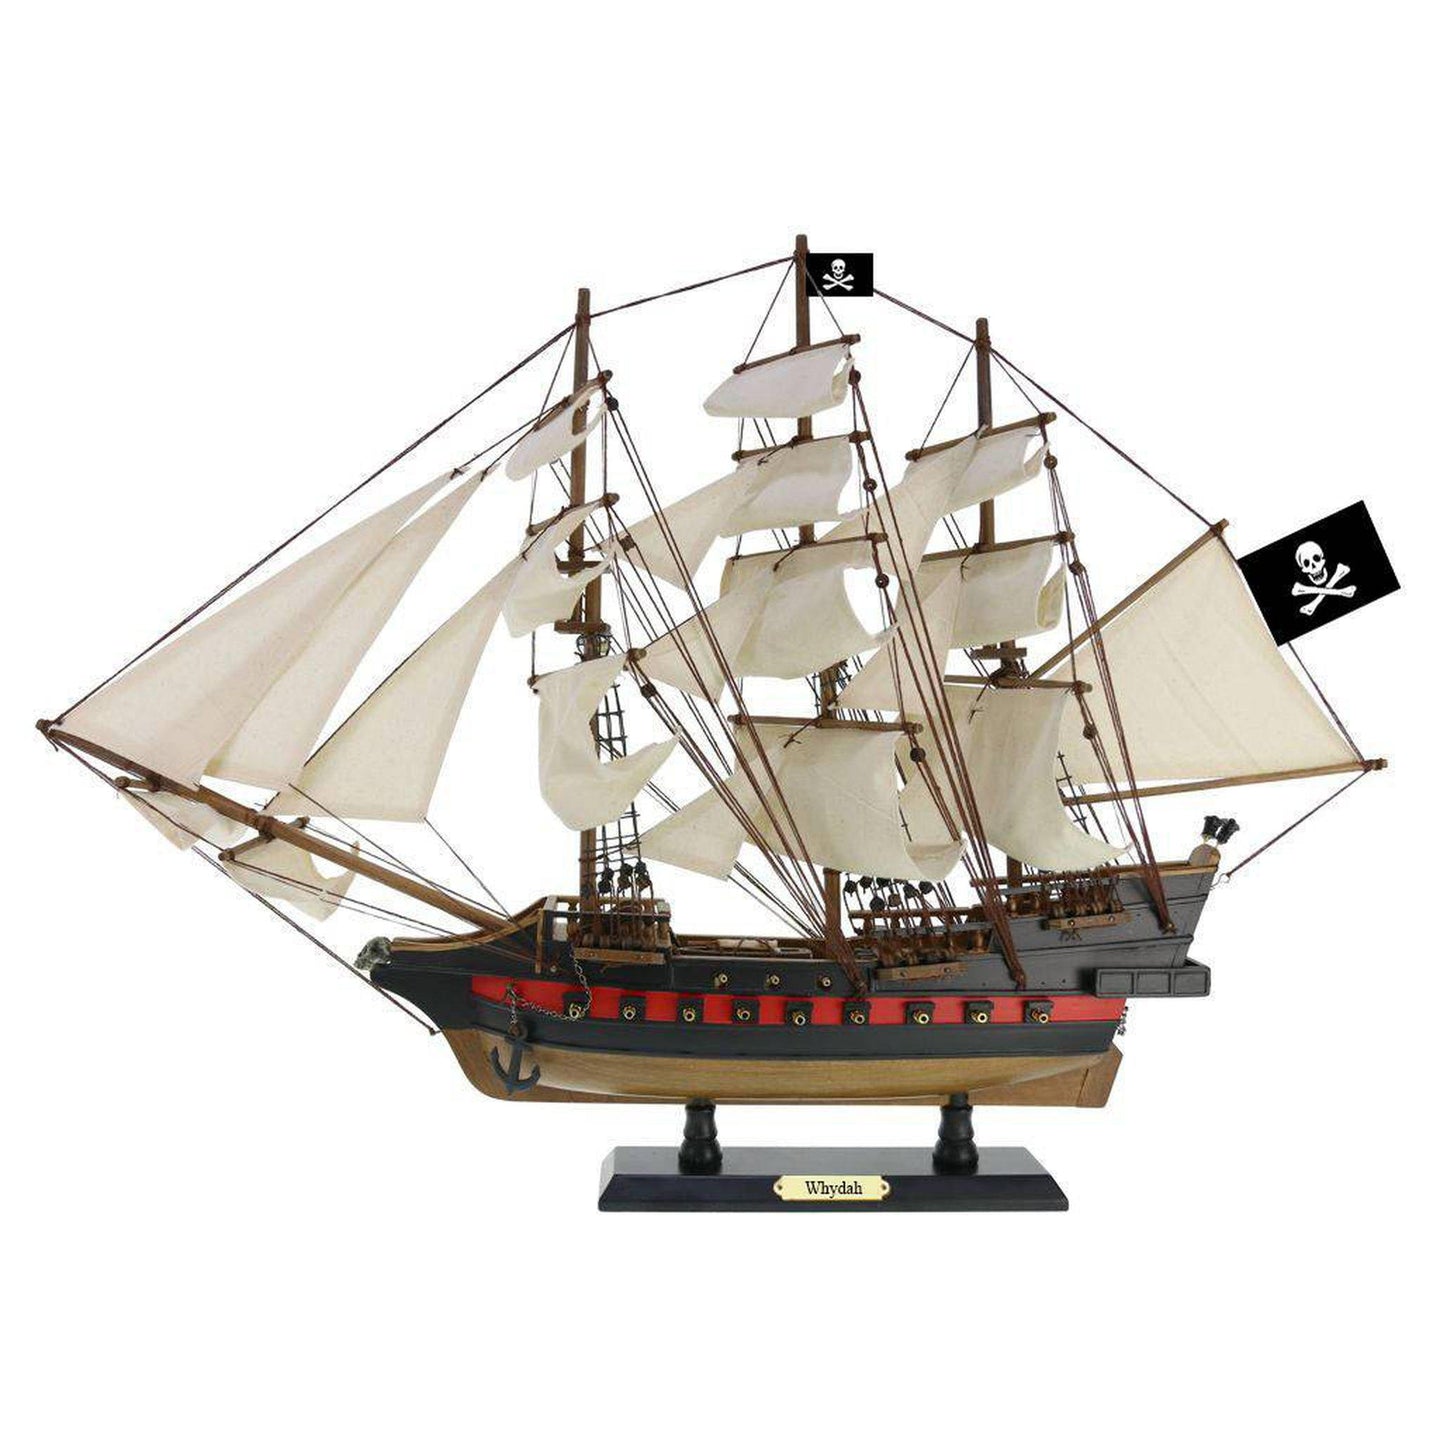 Handcrafted Model Ships Wooden Whydah Gally White Sails Limited Model Pirate Ship 26